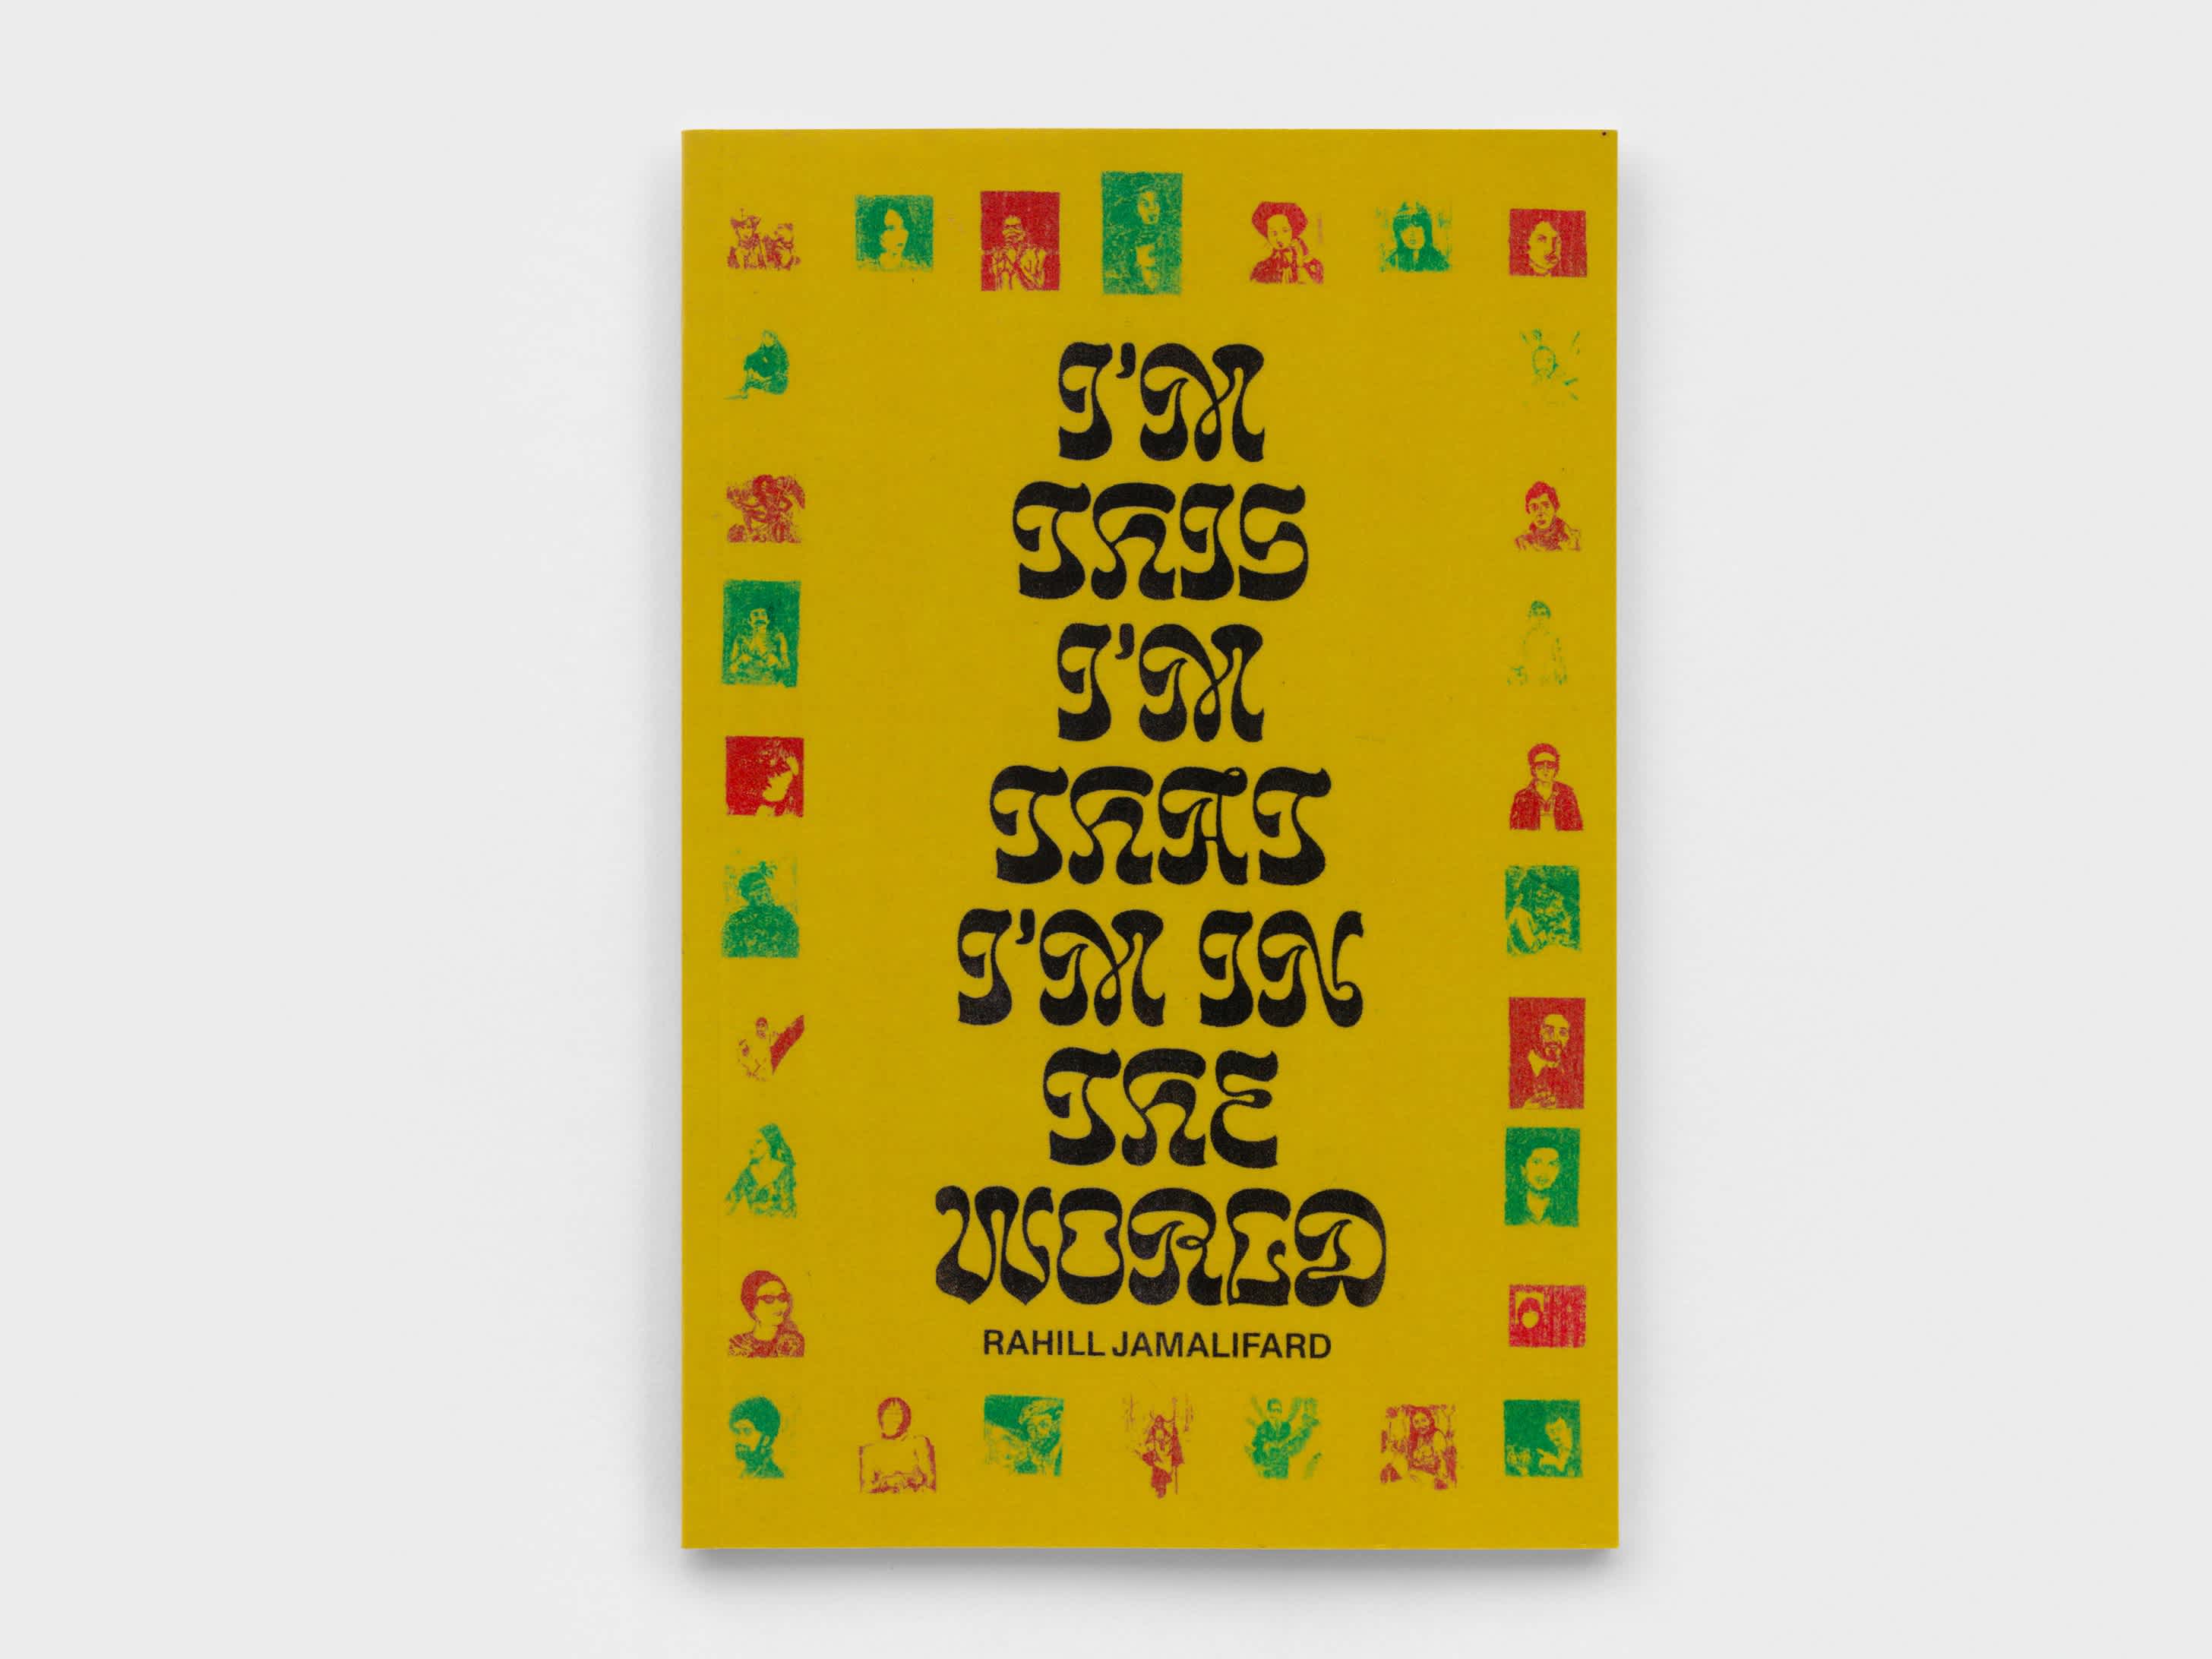 Yellow book cover with alternating red and green images of people's faces creating a border around a black stylized title. 